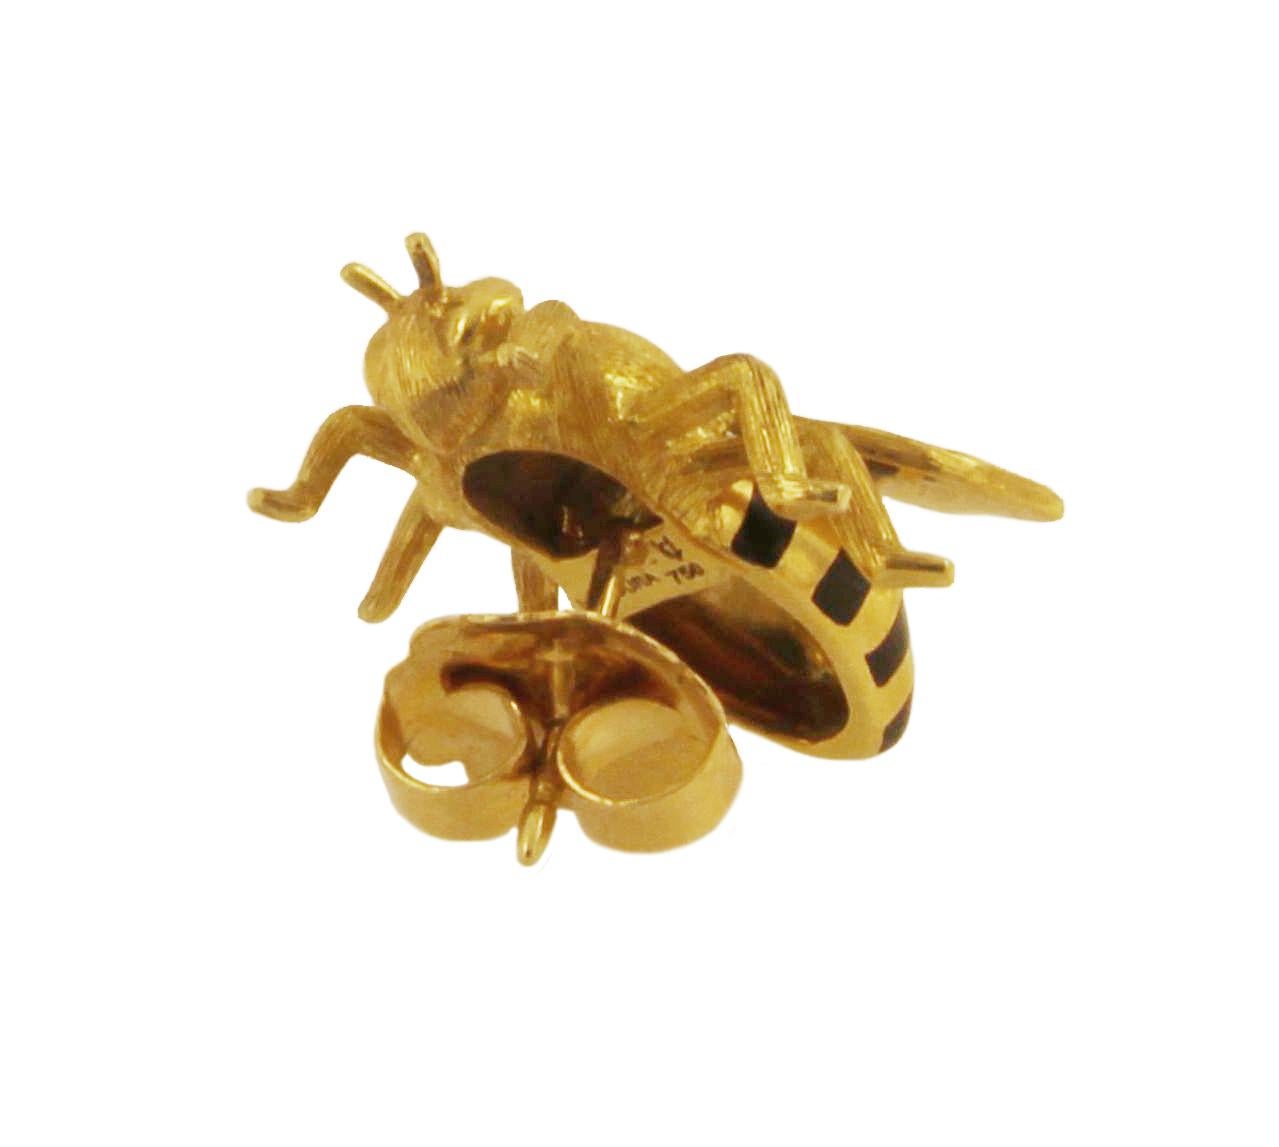 Verdura’s childhood passion for the animal world was later translated into his jewelry designs, as is evident here with his whimsical Honeybee Earrings, based on an archival design from 1943.

Mint condition
18k Yellow Gold & Black Enamel
Length: